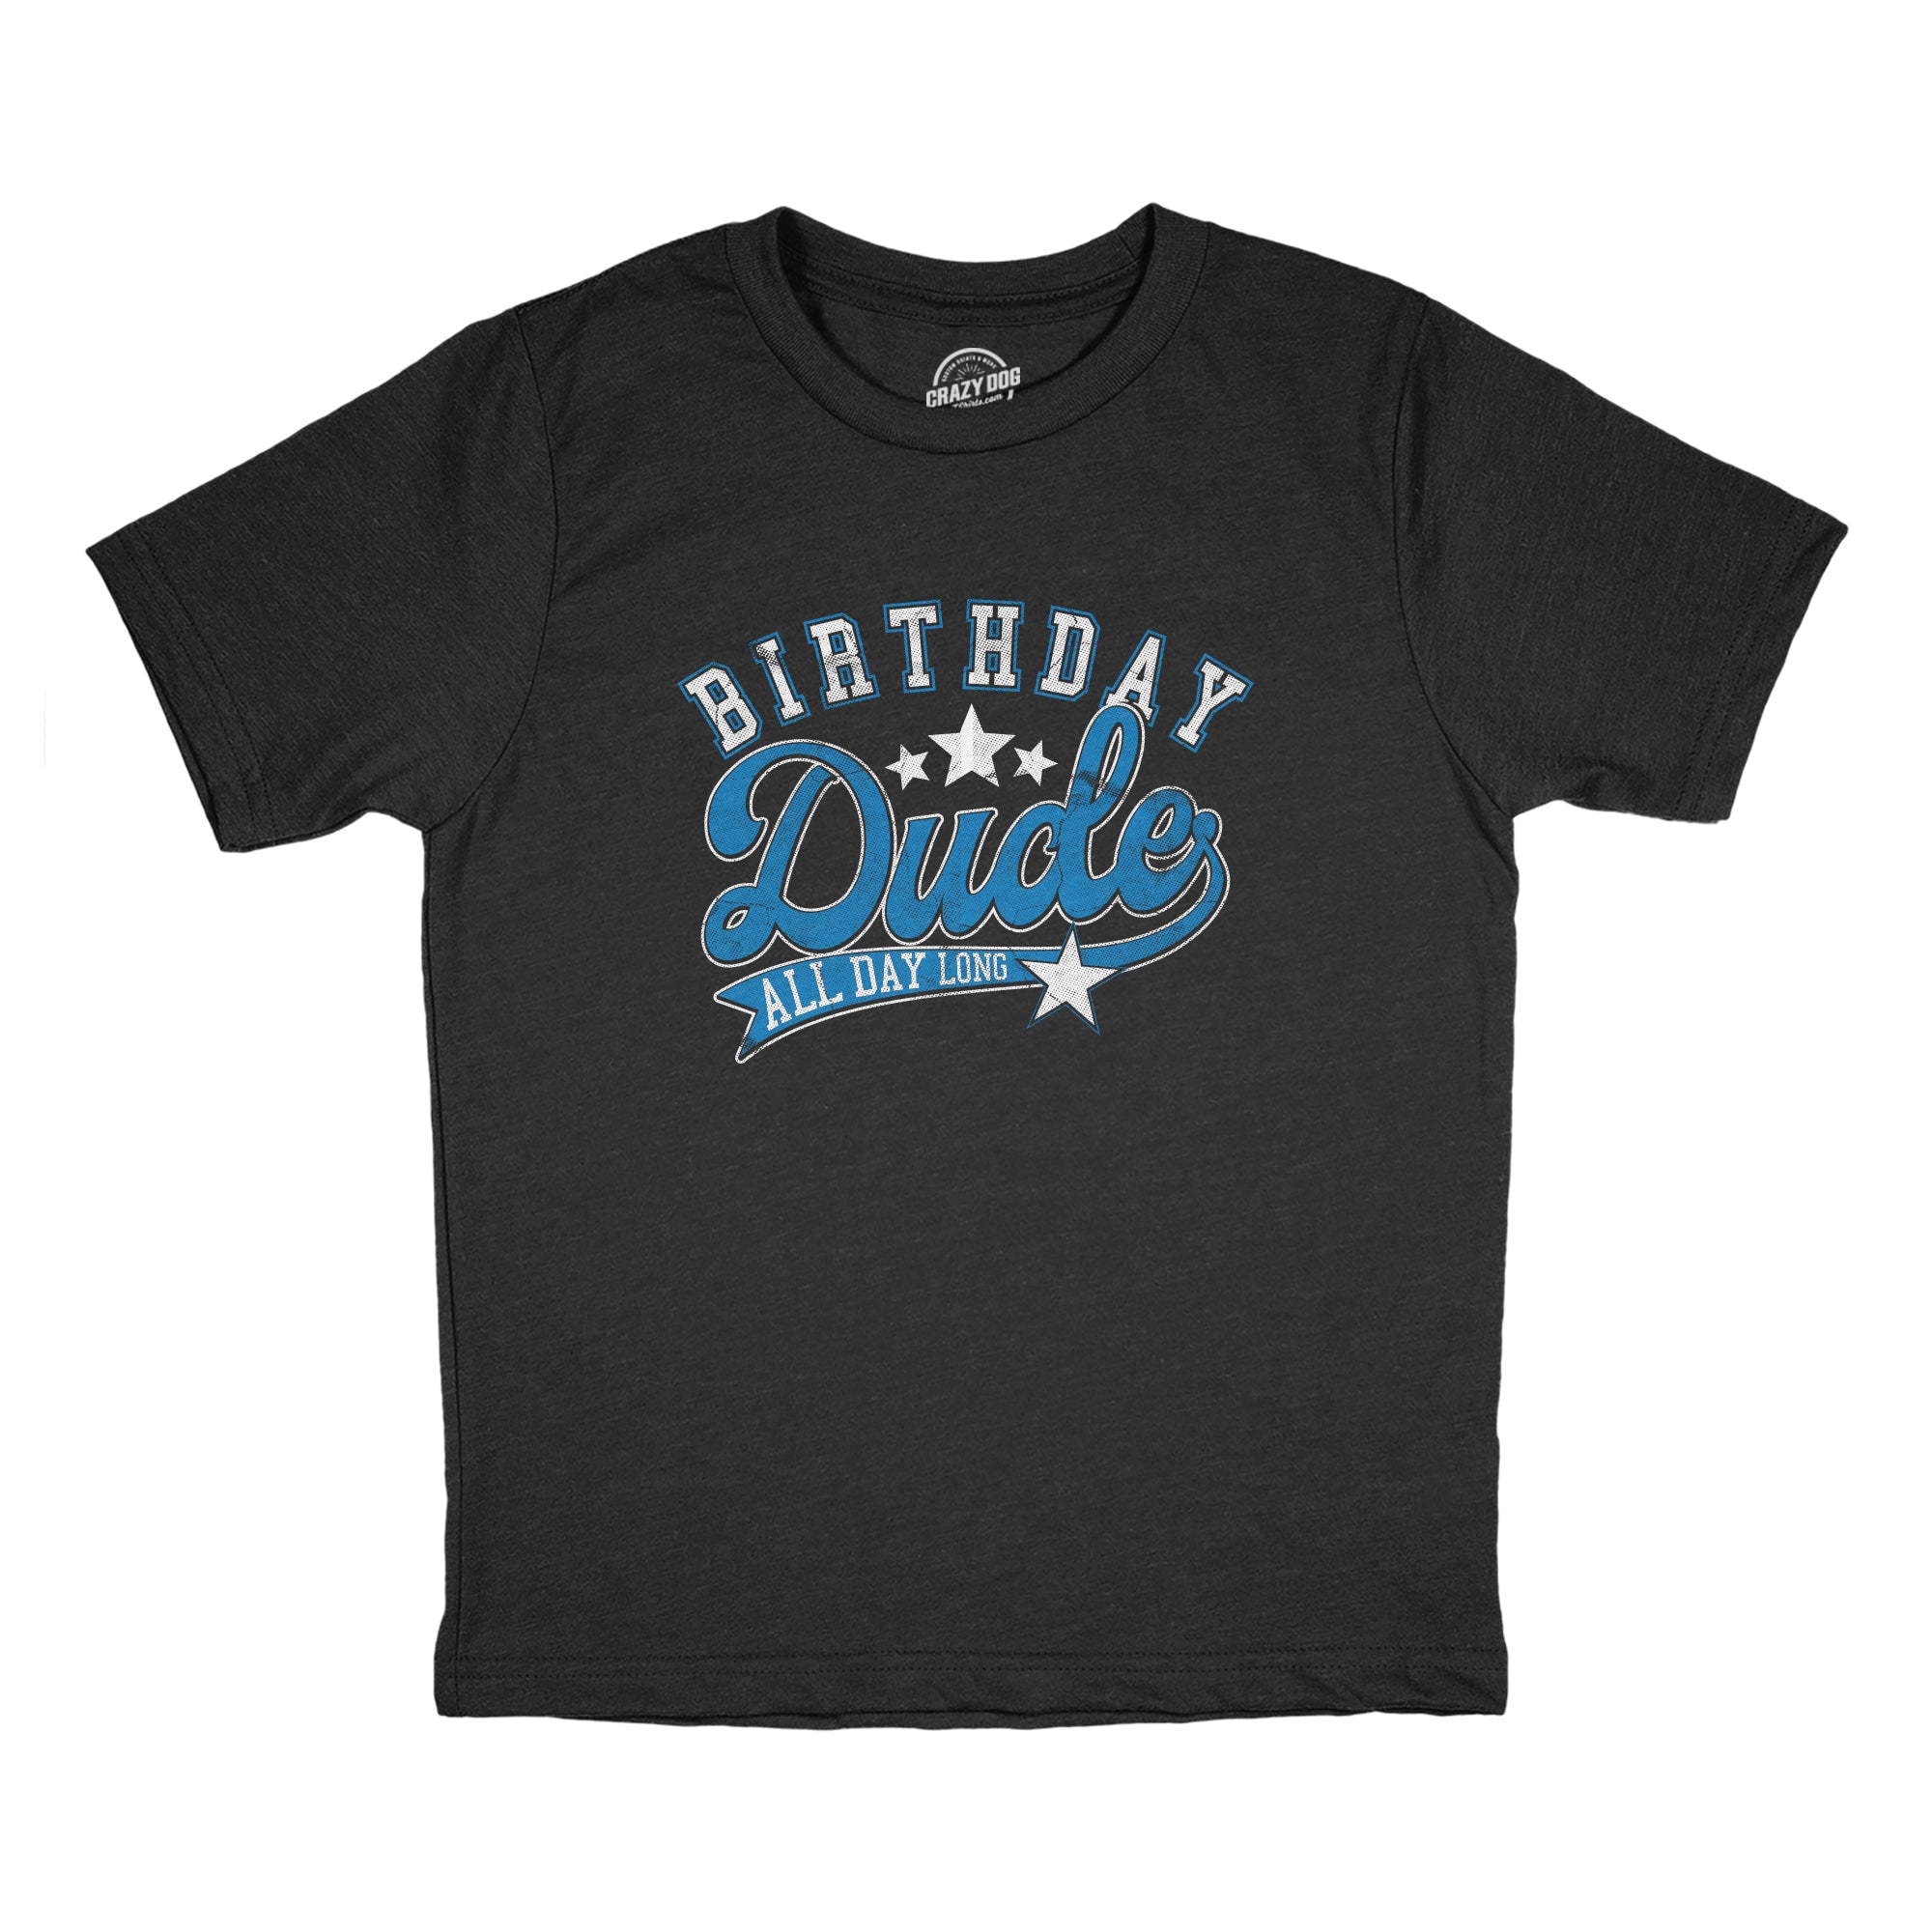 Funny Heather Black - BIRTHDAY Birthday Dude All Day Long Youth T Shirt Nerdy Sarcastic Tee